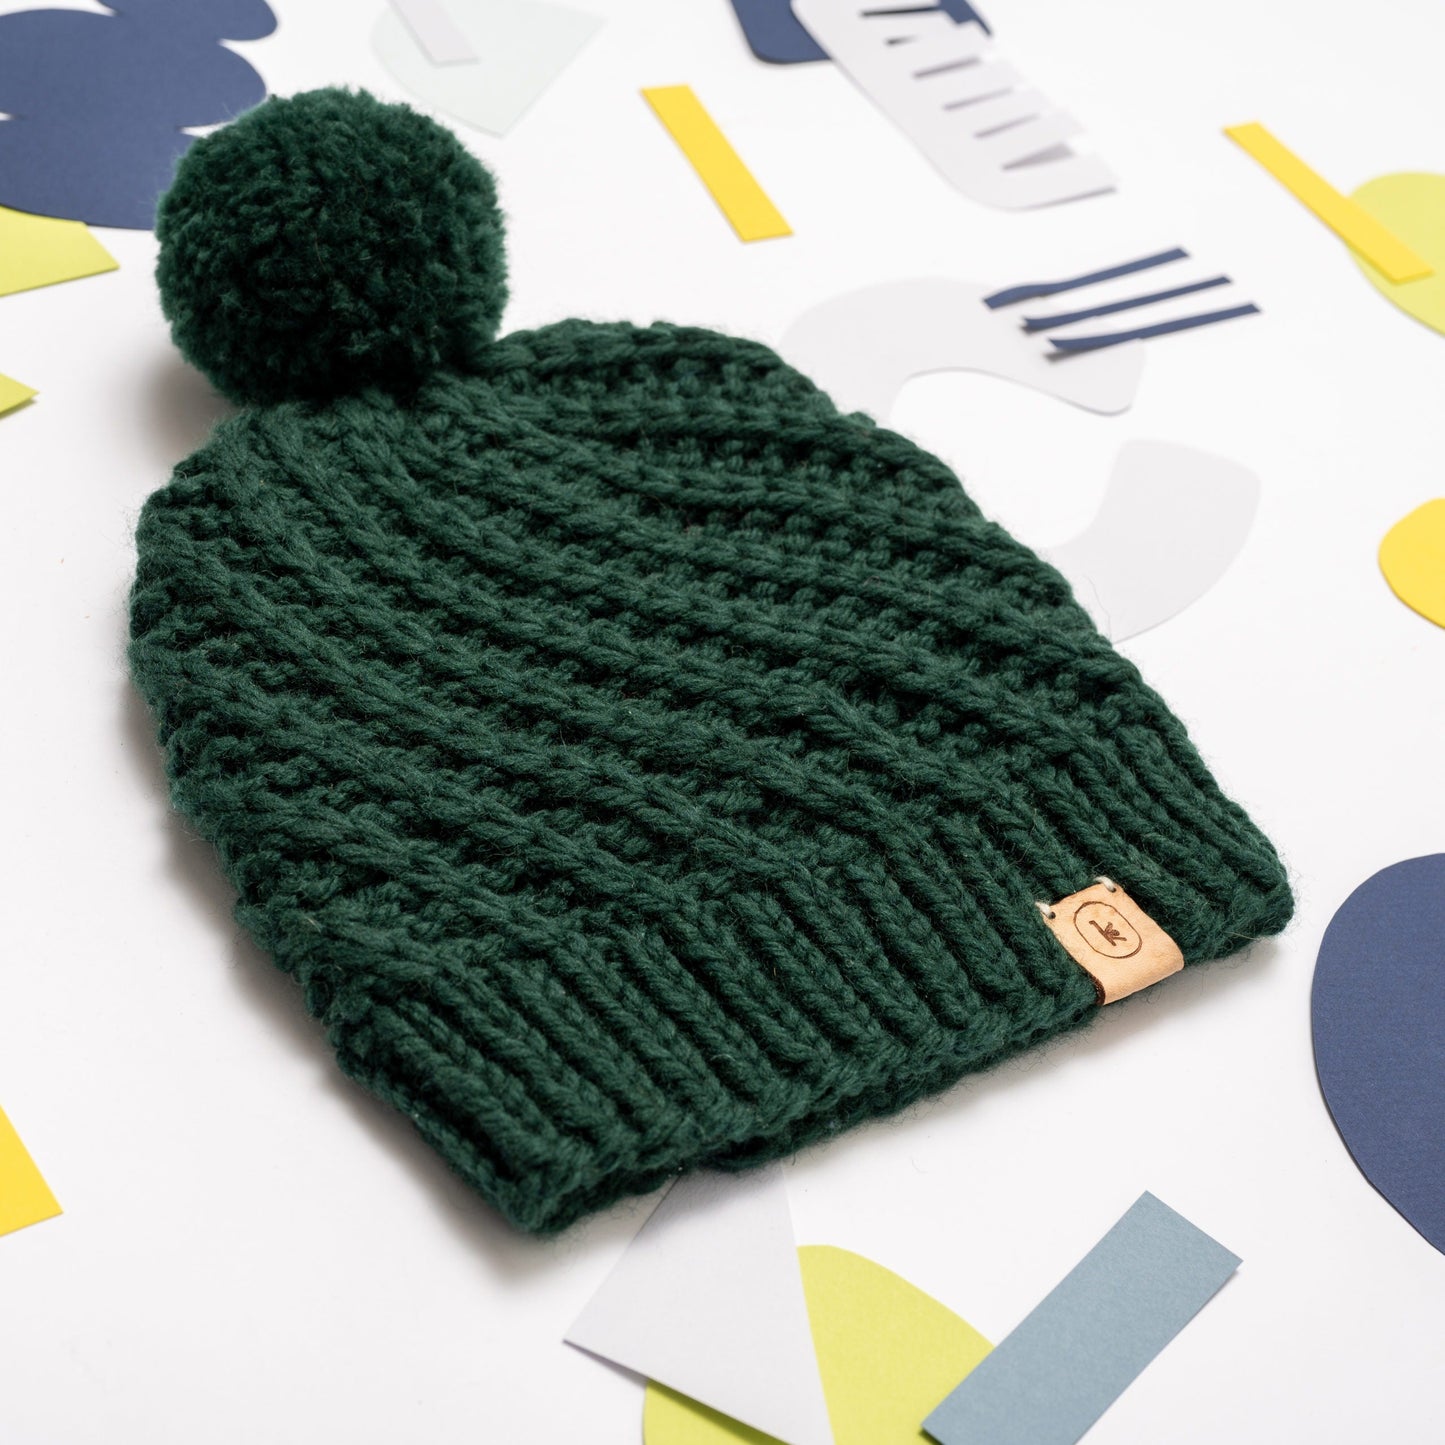 Year of Bulky Hats Kit - Wister